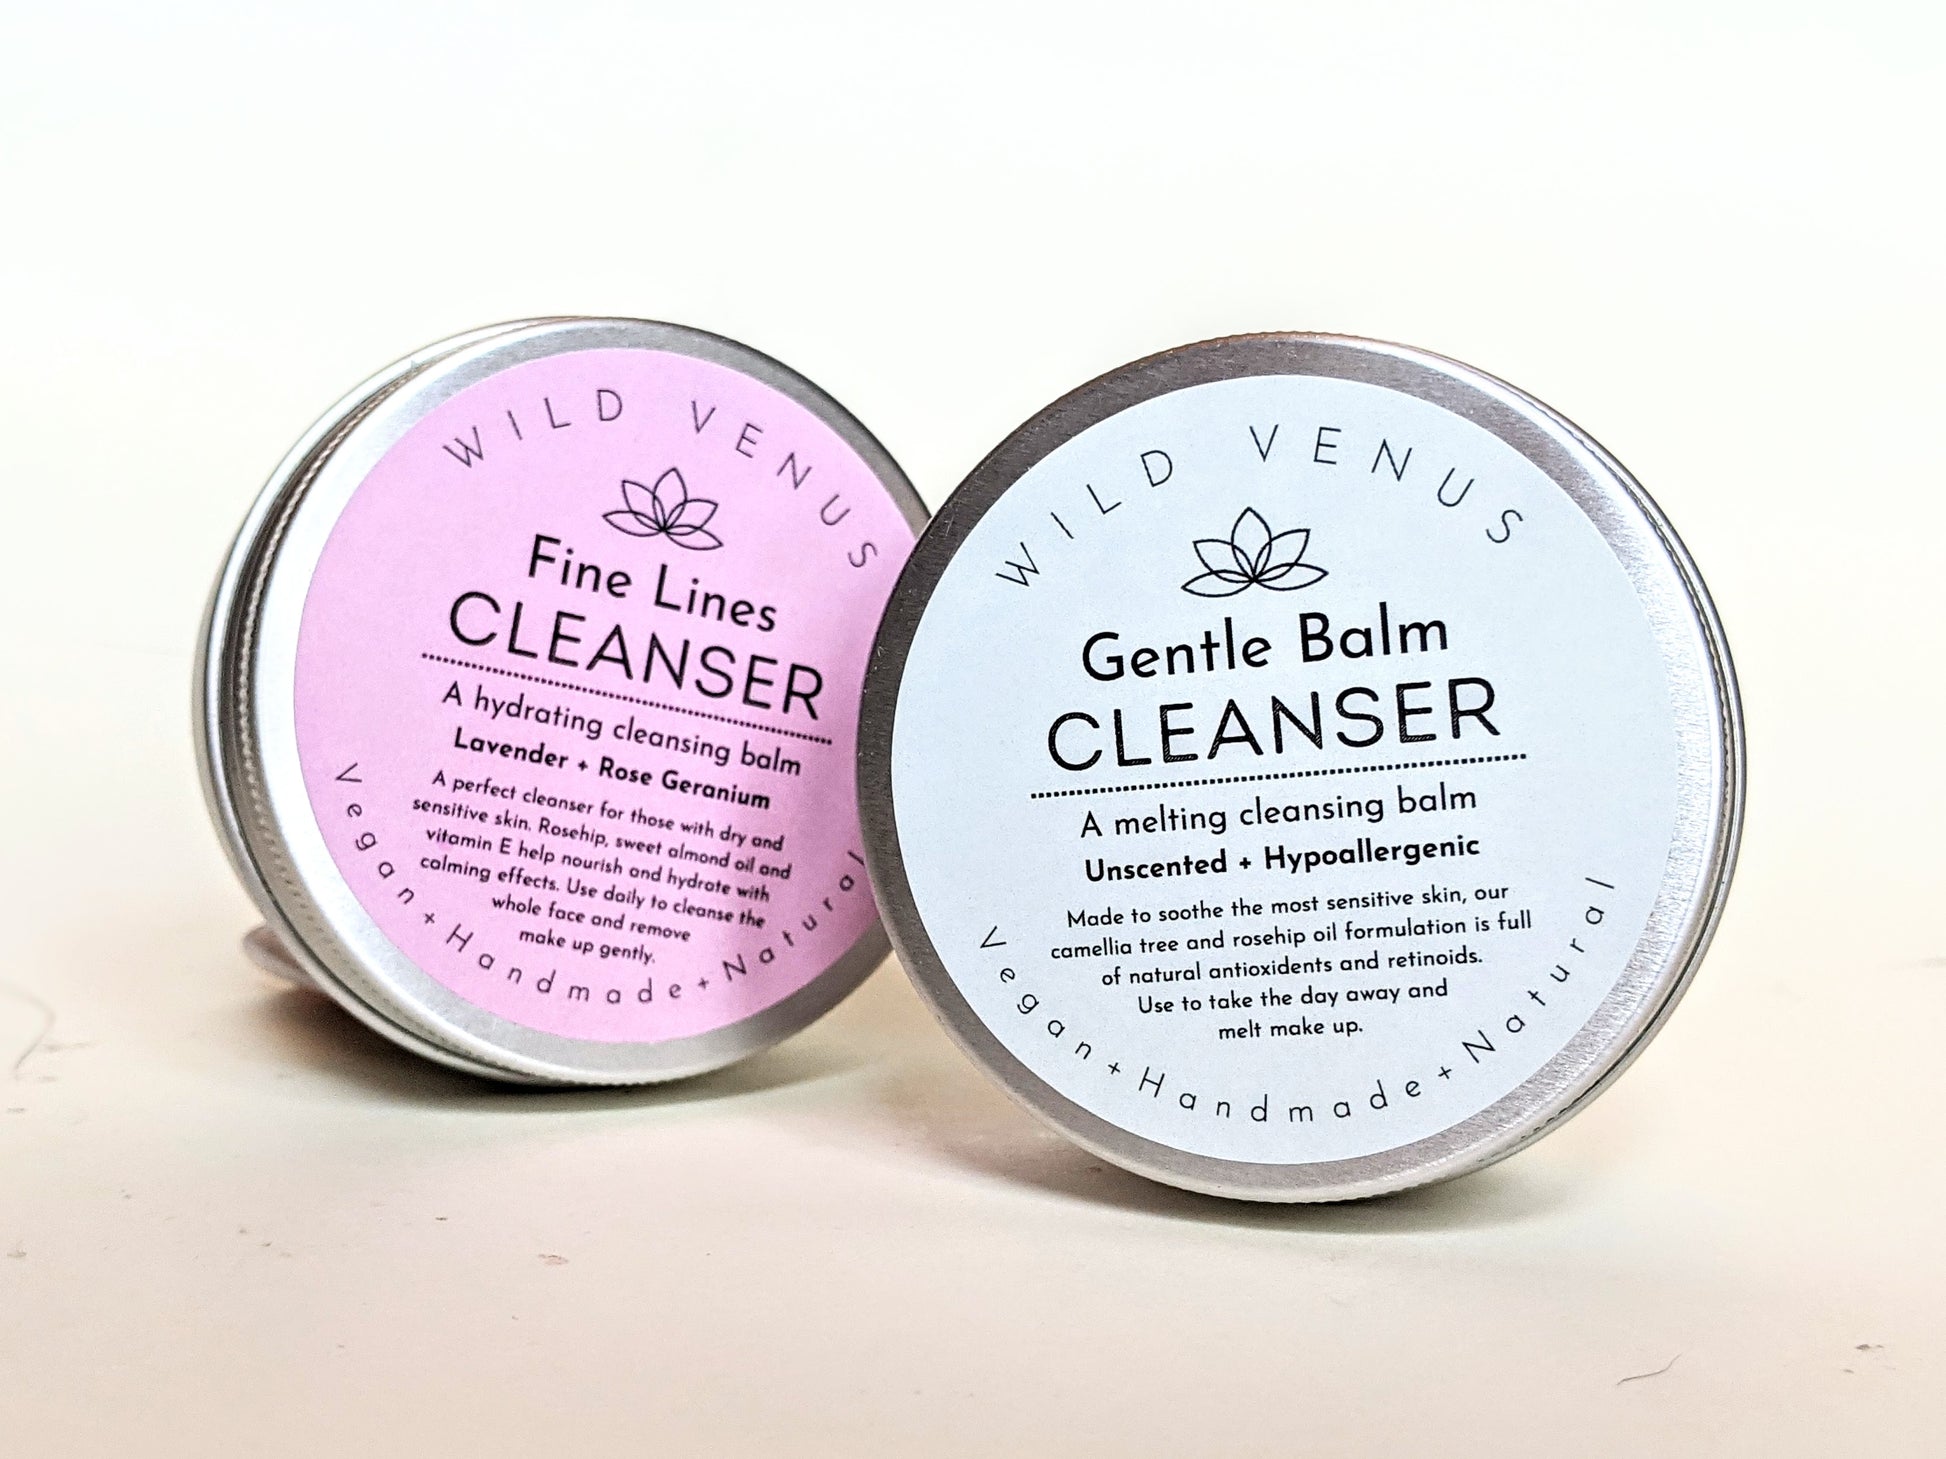 A gentle cleanser balm in front of the fine lines cleanser balm. 